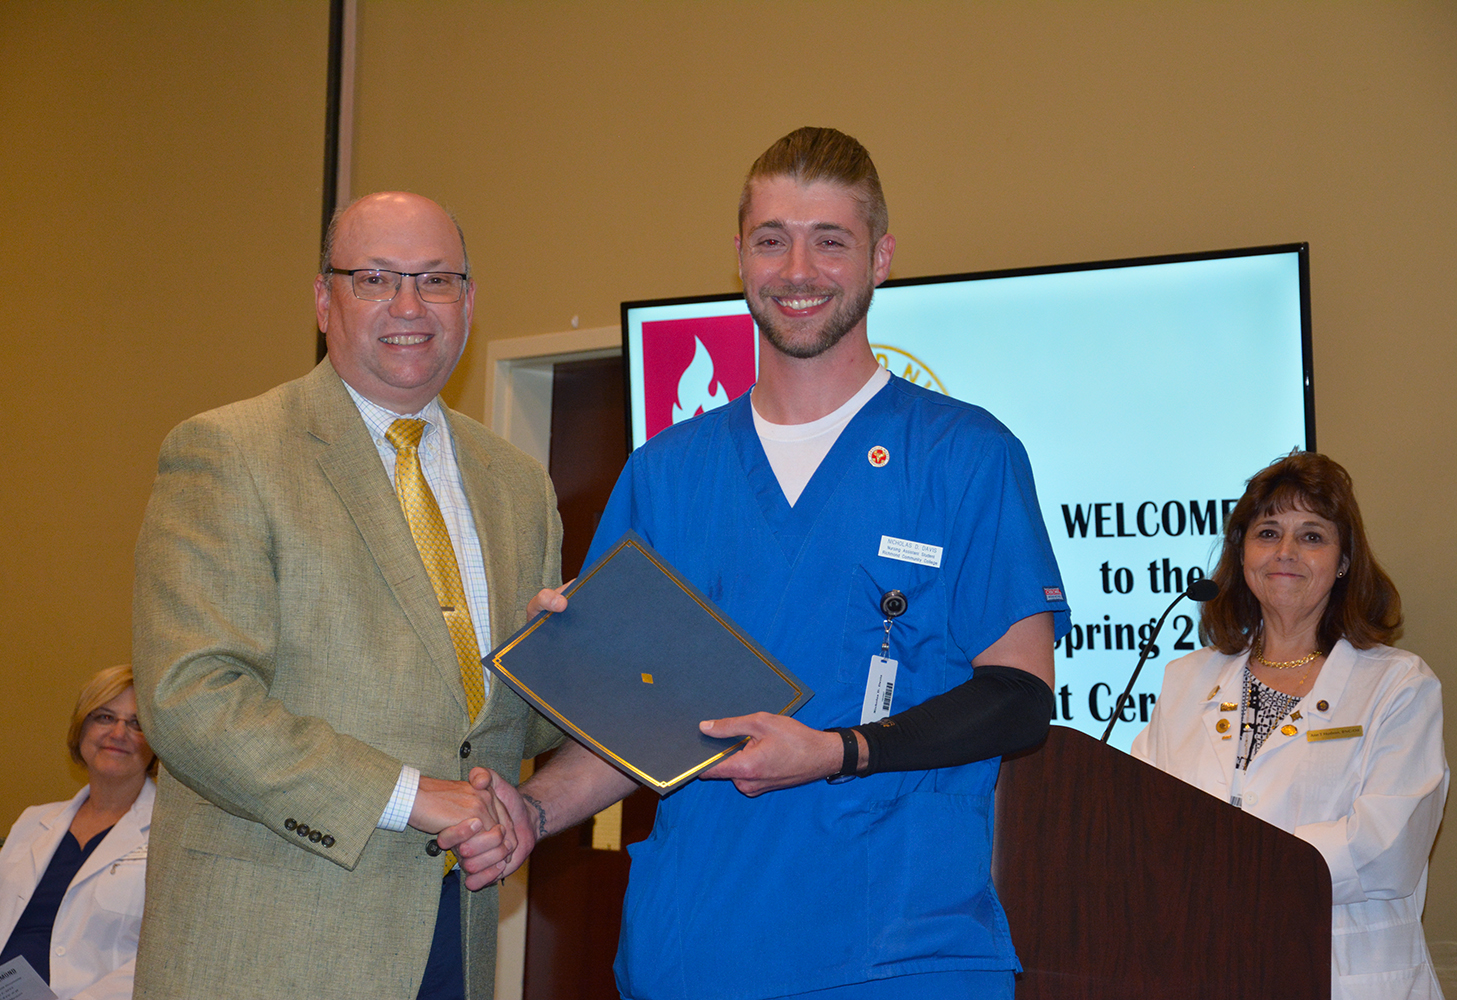 Richmond Community College nursing assistant student Nicholas Davis shakes hands with Dr. Dale McInnis, president of the College, during the pinning ceremony held for students completing the program. Pictured also is Ann Hudson, an instructor for the Nursing Assistant program.